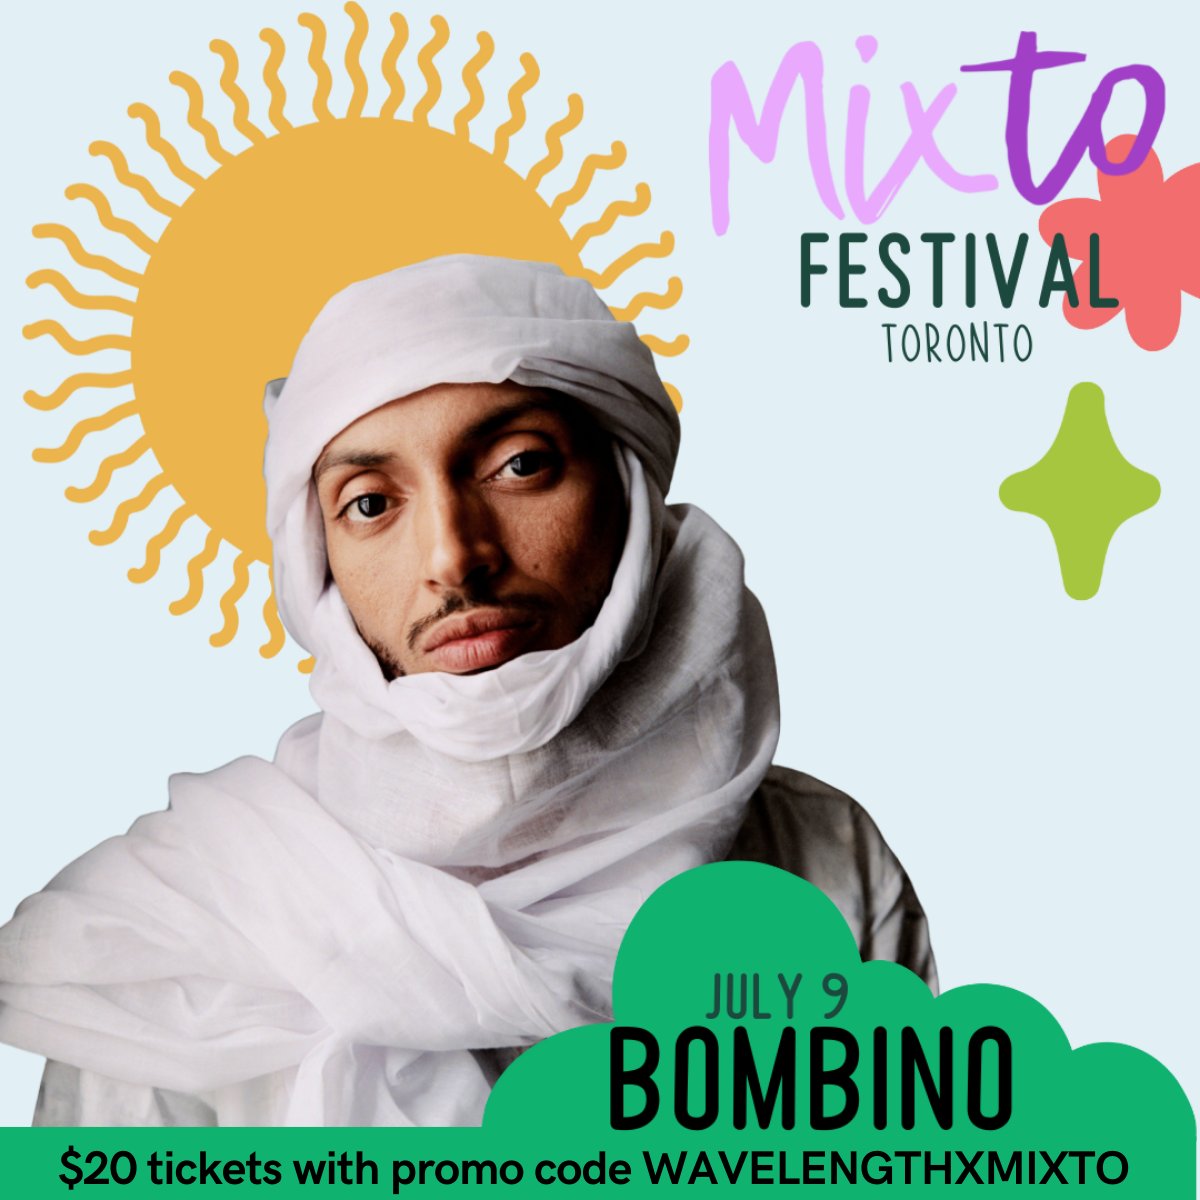 TORONTO! See you on July 9th at @mixtofestival with @wavelengthMusicSeries and @smallworldmusic. For a limited time only, use the promo code WAVELENGTHMIXTO for $5 off your tickets! More info: bit.ly/WAVELENGTHXMIX…